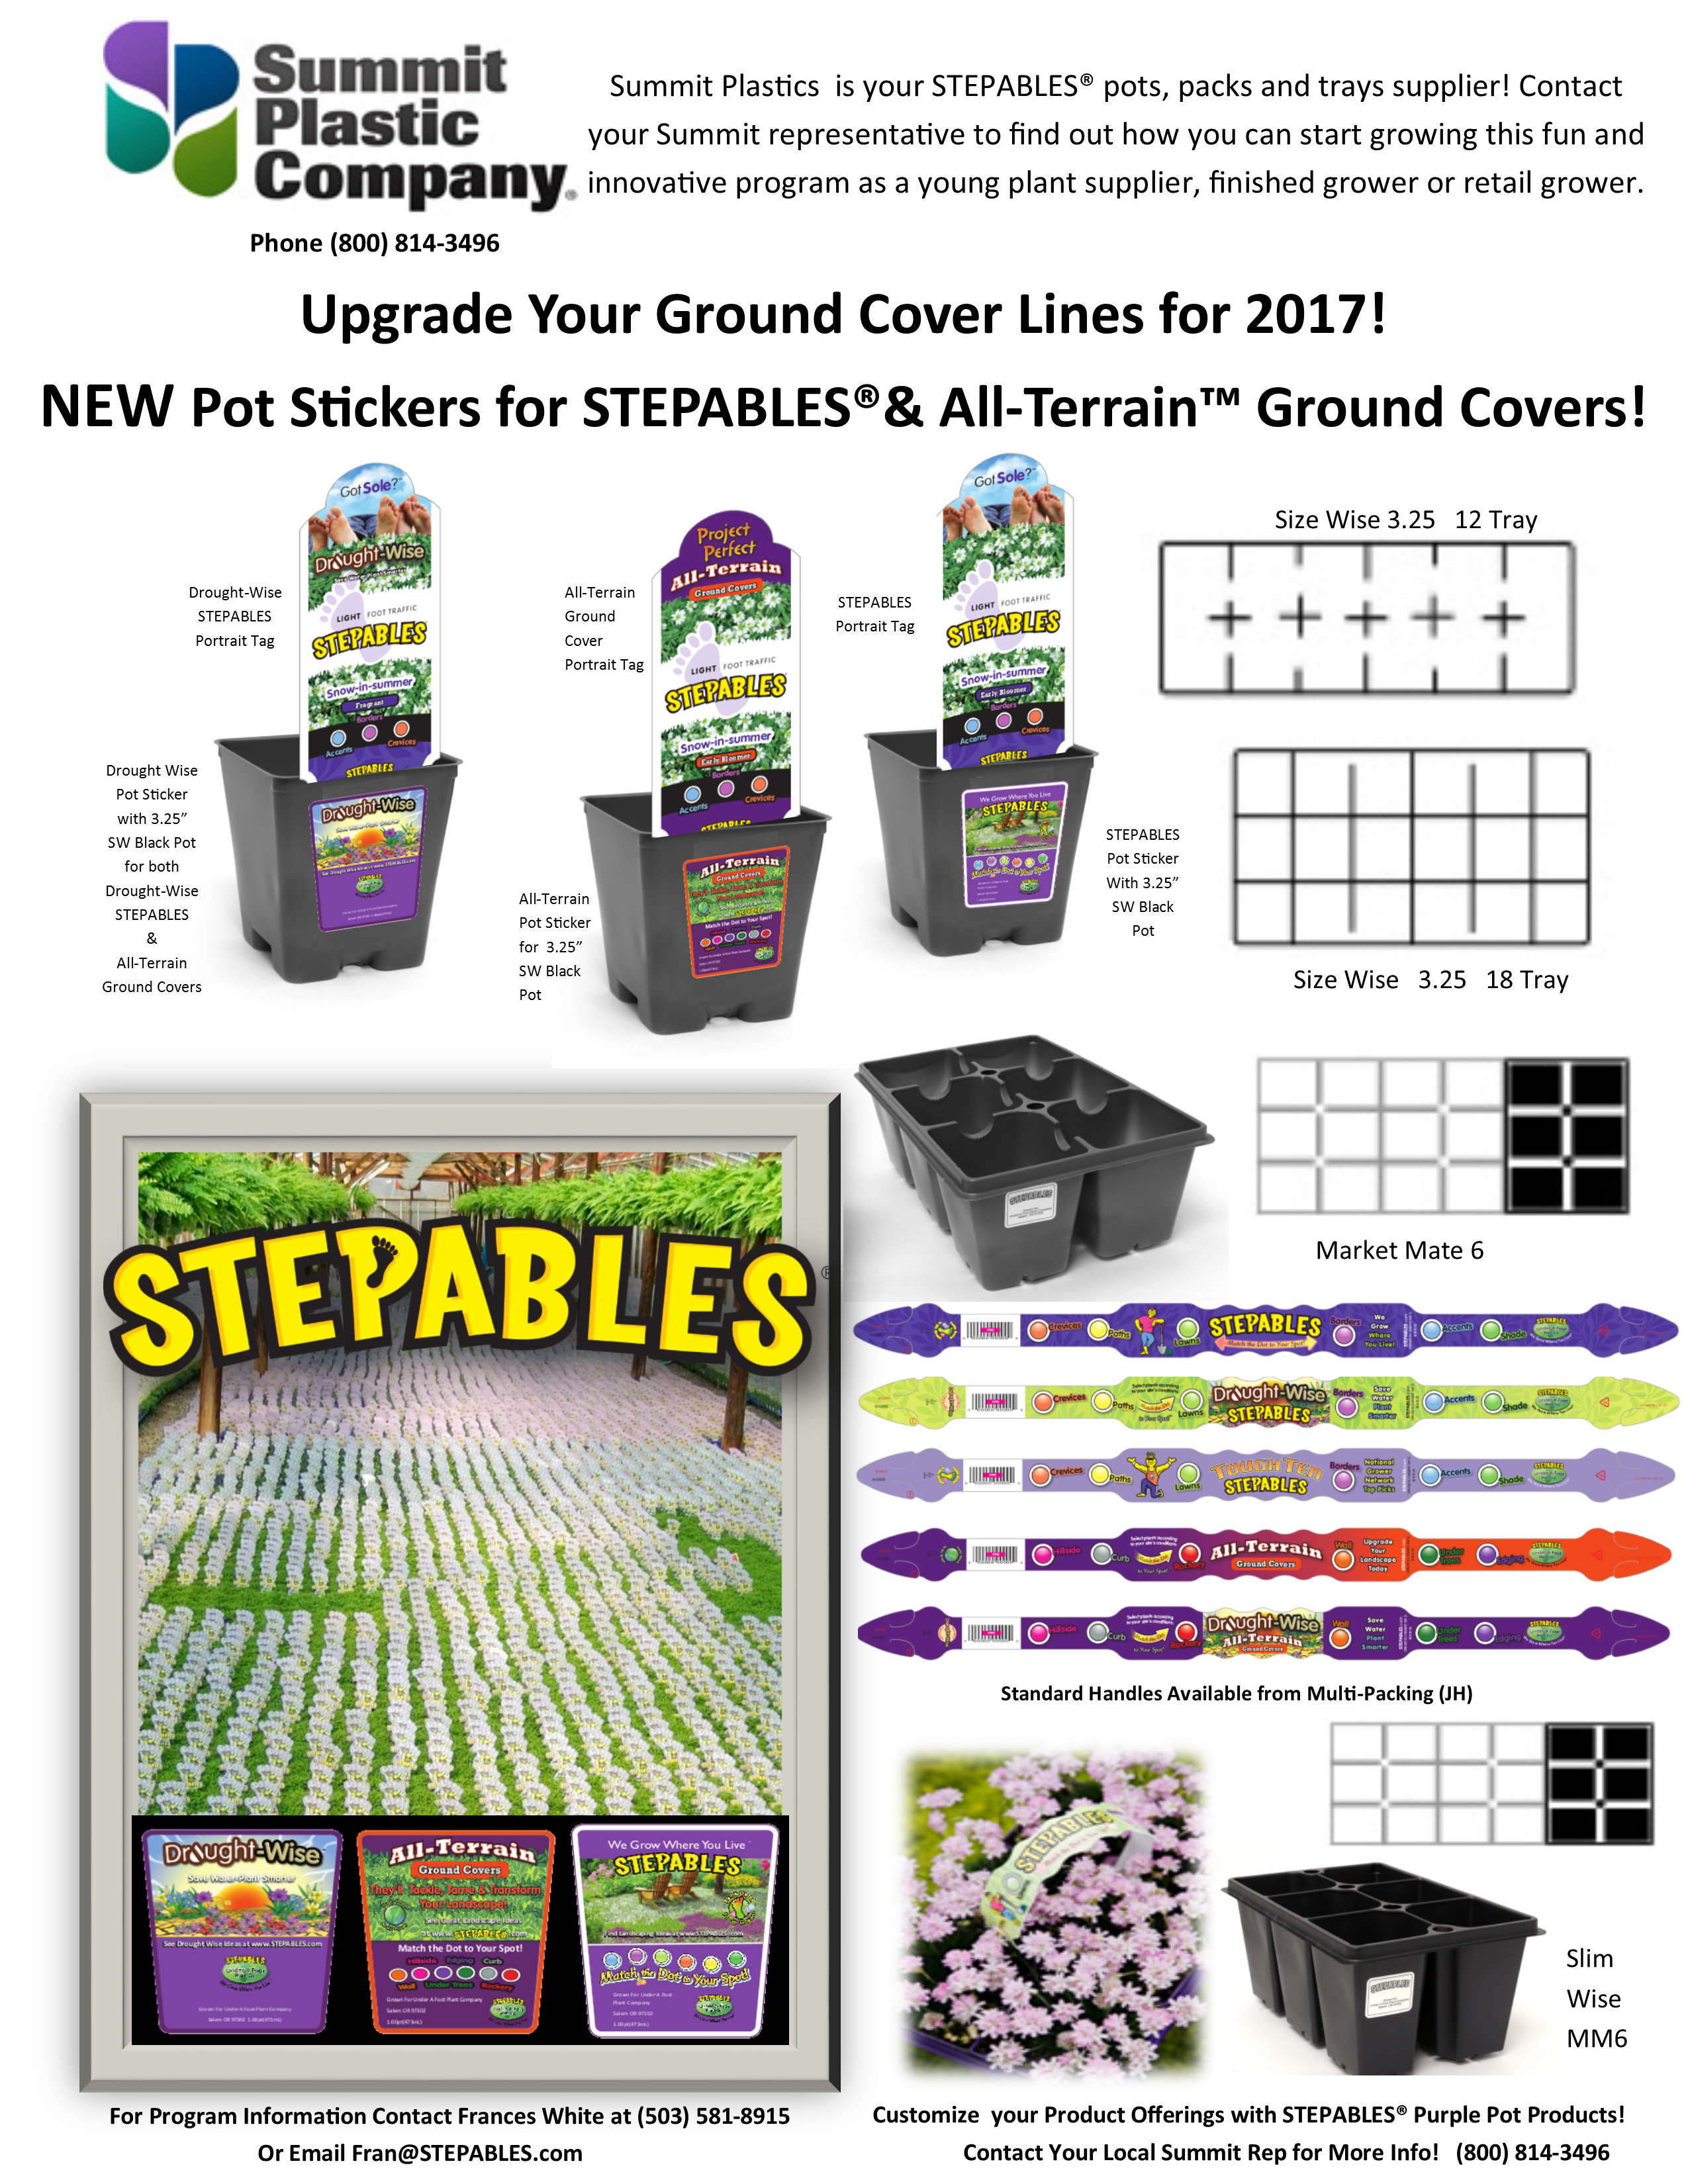 STEPABLES Summit Plastic Co Sales sheet 2016-17.png